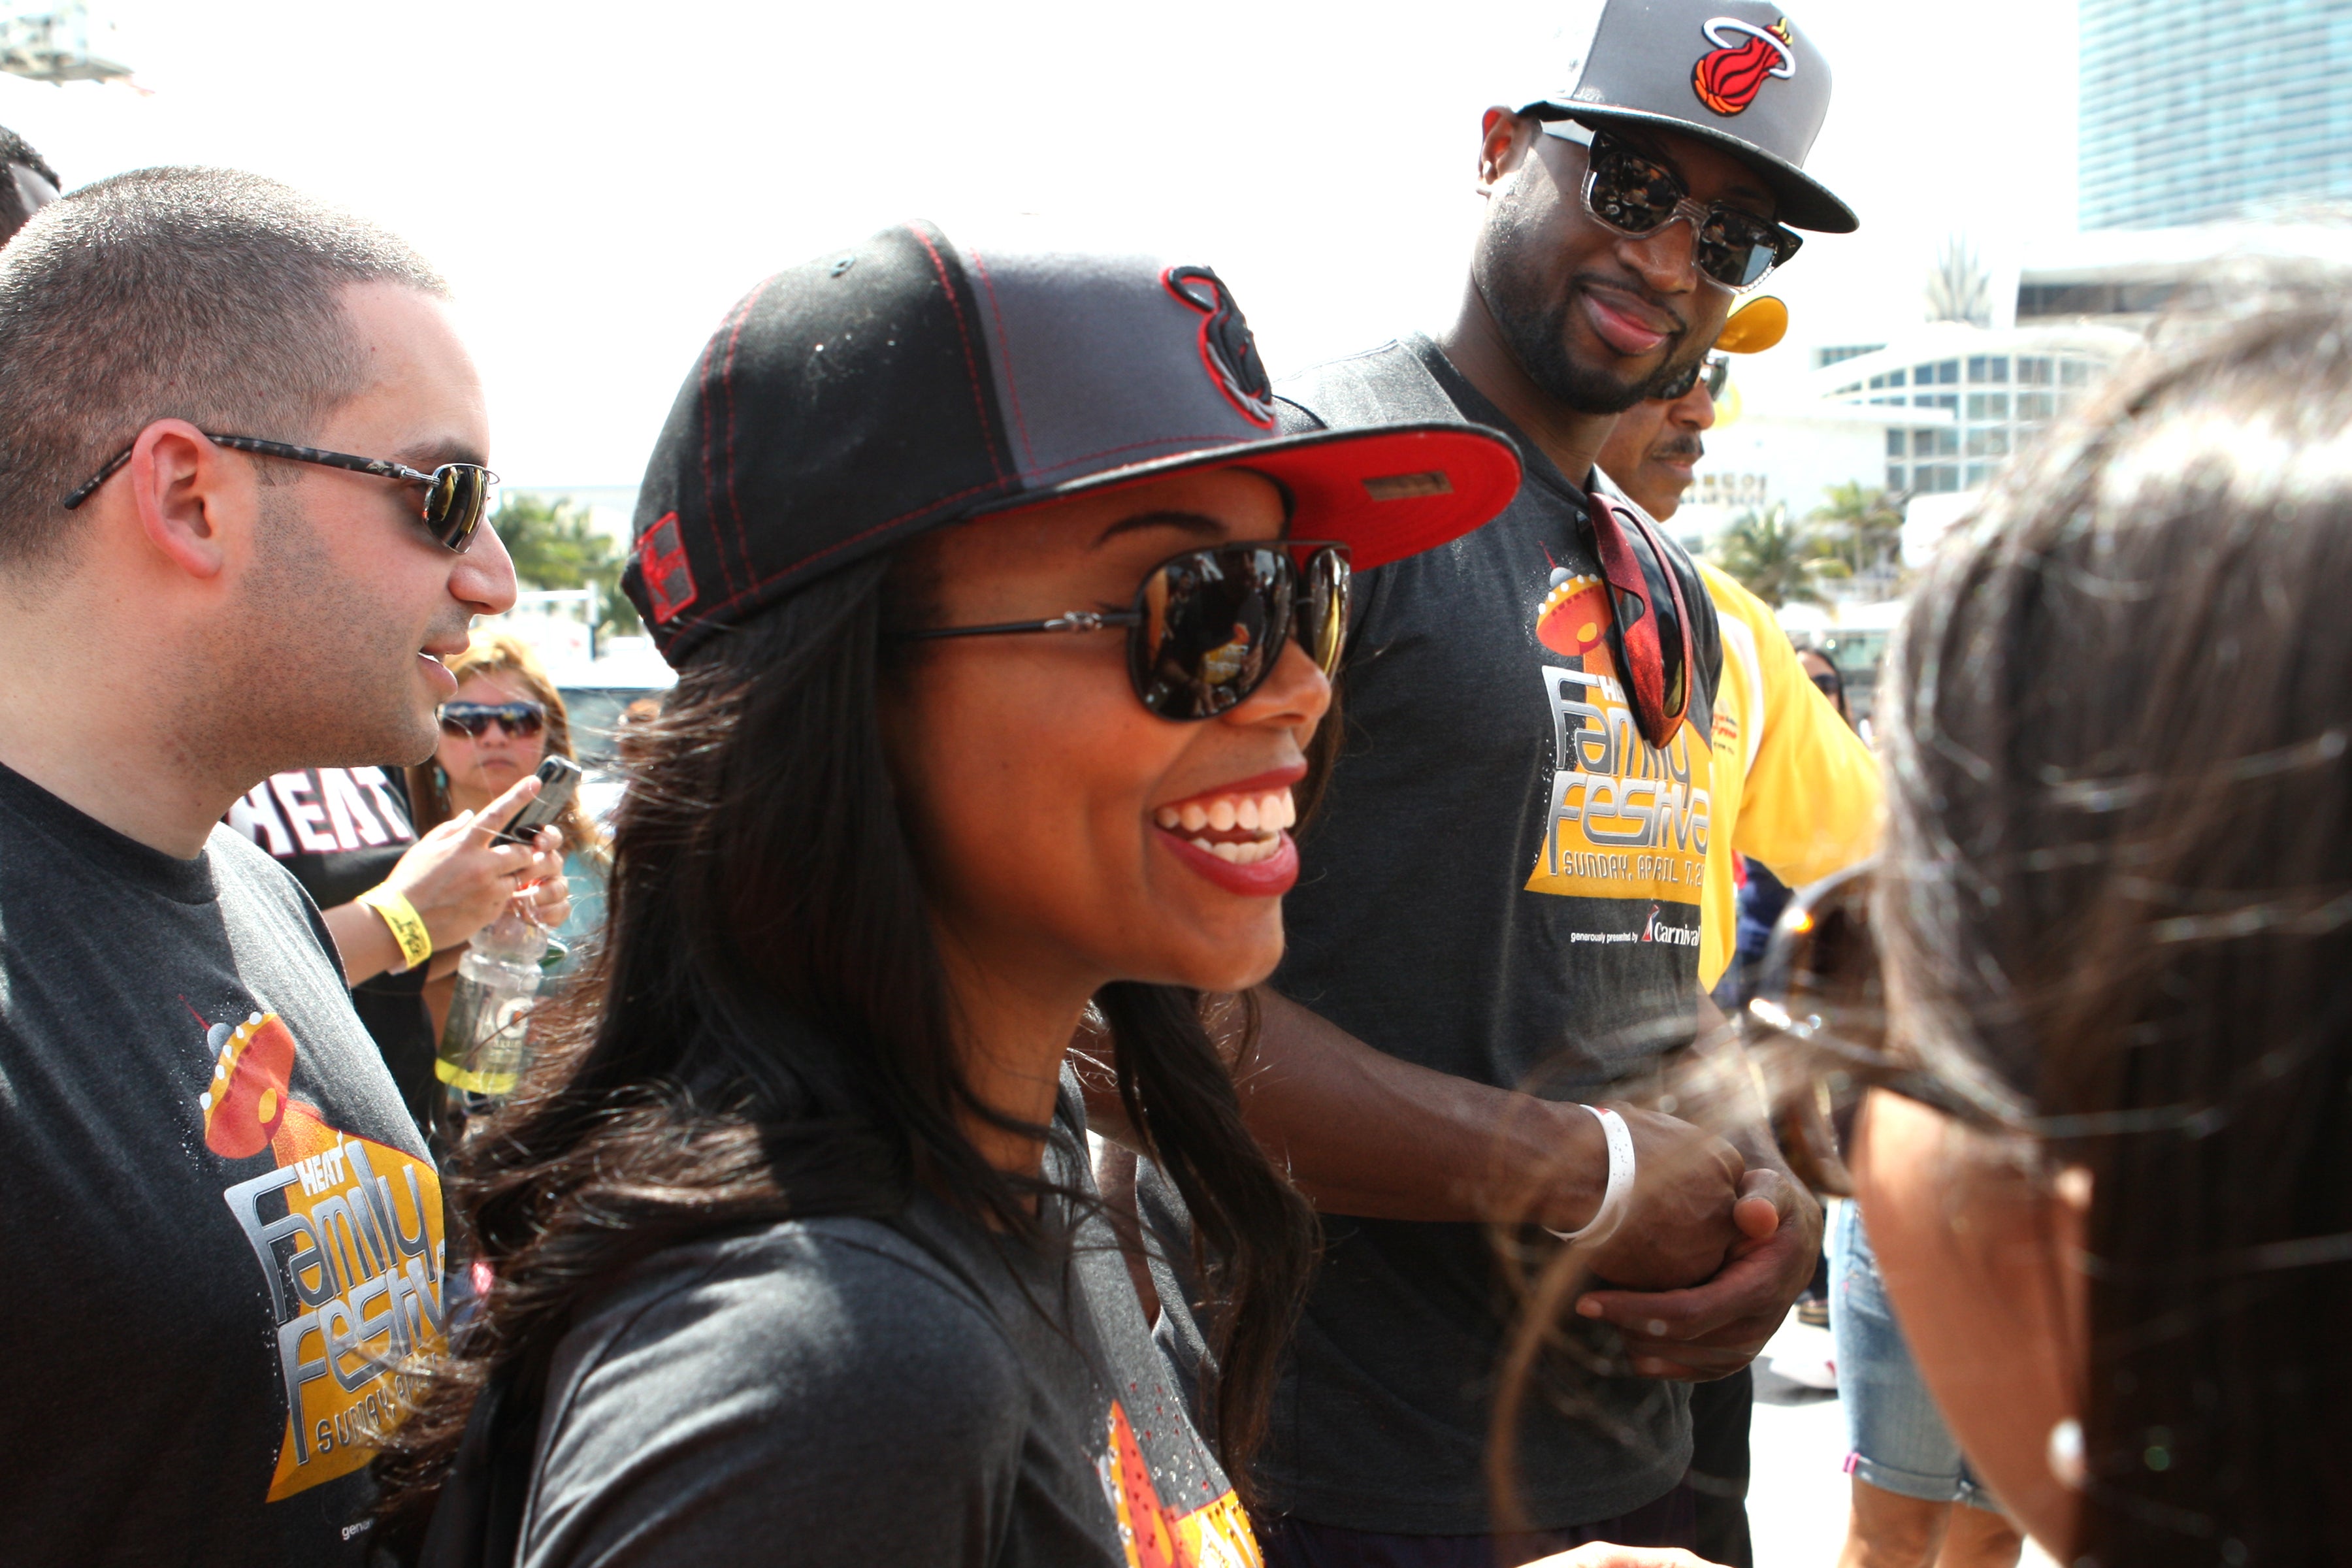 The Timeline Of Gabrielle Union And Dwyane Wade's Love